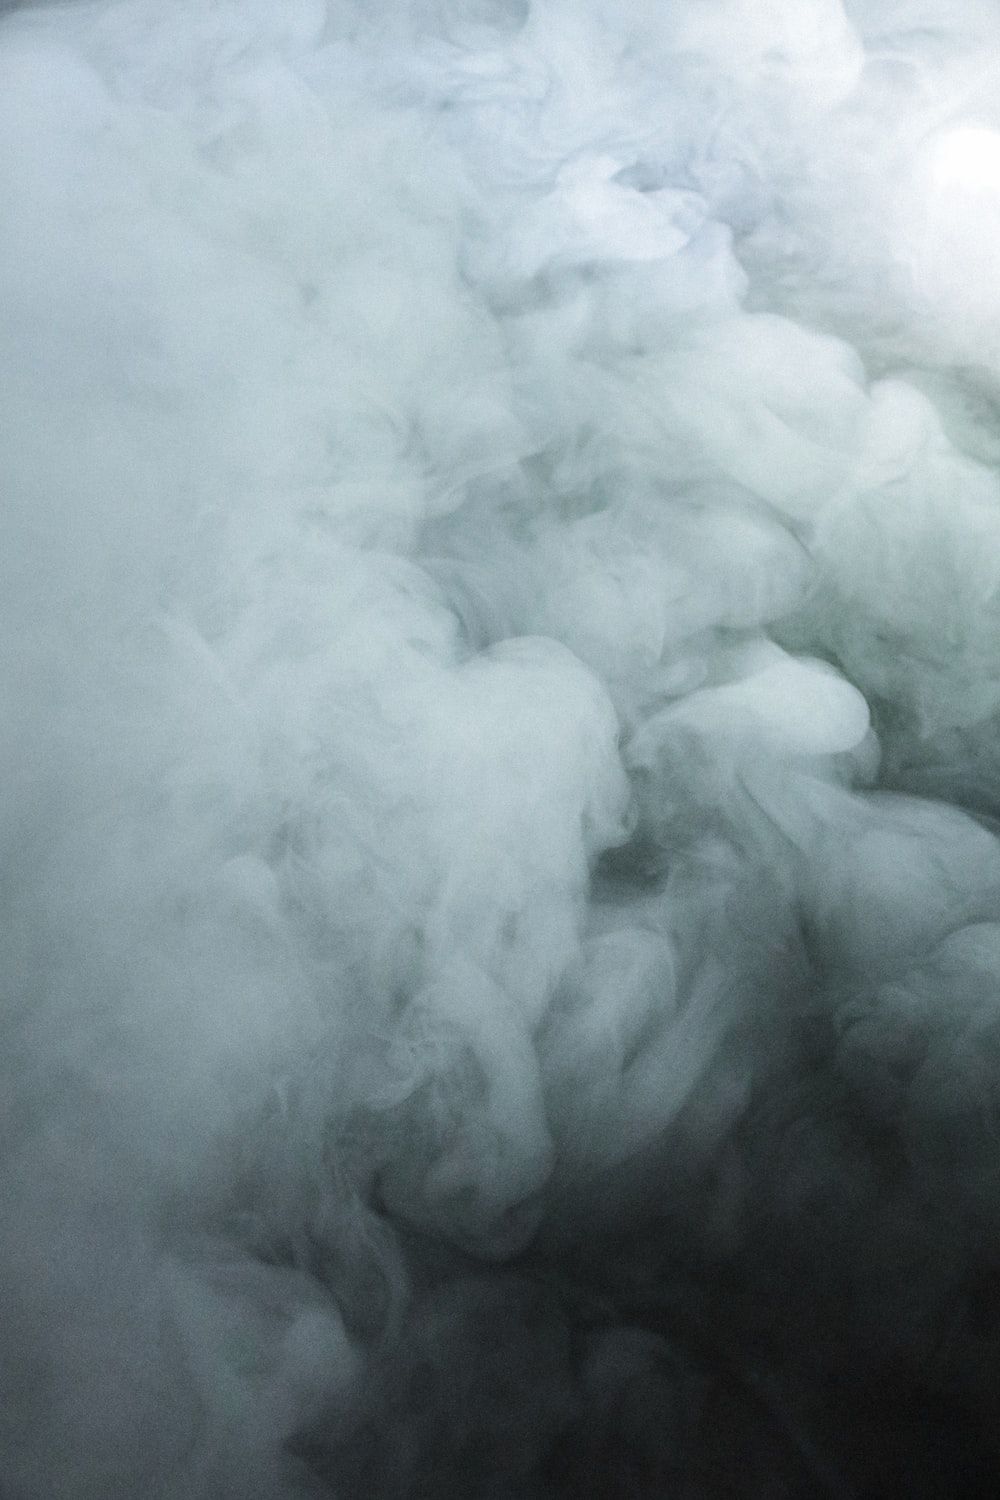 A photograph of smoke in the air - Smoke